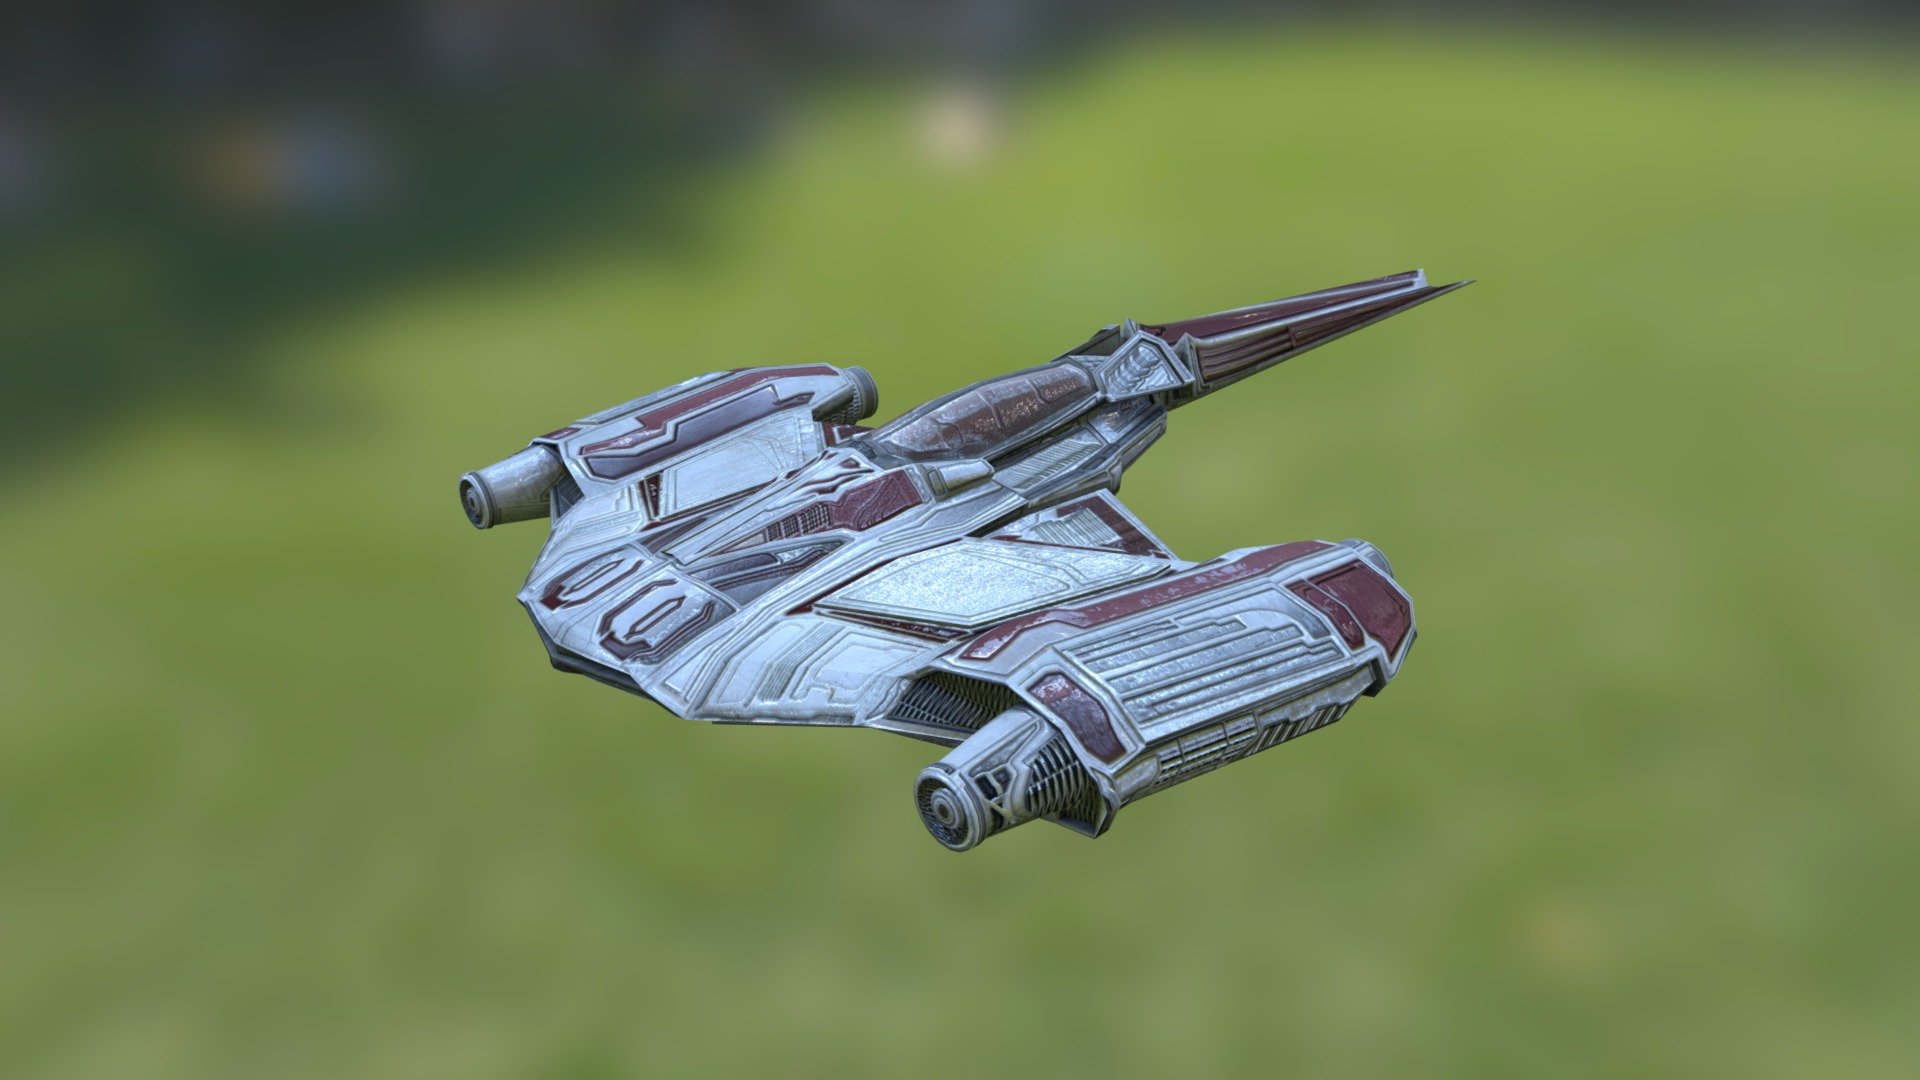 From the other side of the galaxy comes this nimble fightercraft. Capable of interstellar travel as well as atmospheric re-entry, this ship can take on any environment. The ship is armed with two wing-mounted cannons, but can be easily fitted with rockets or missiles as the mission requires.


Includes texture map, normal bump map, and specular map, all at 4096x4096 pixels.
One texture map for the engine rims, at 2048x2048 pixels.
The model does not have any moving parts and is not rigged.

Original model by Arteria3D, sold here with full permission 3d model